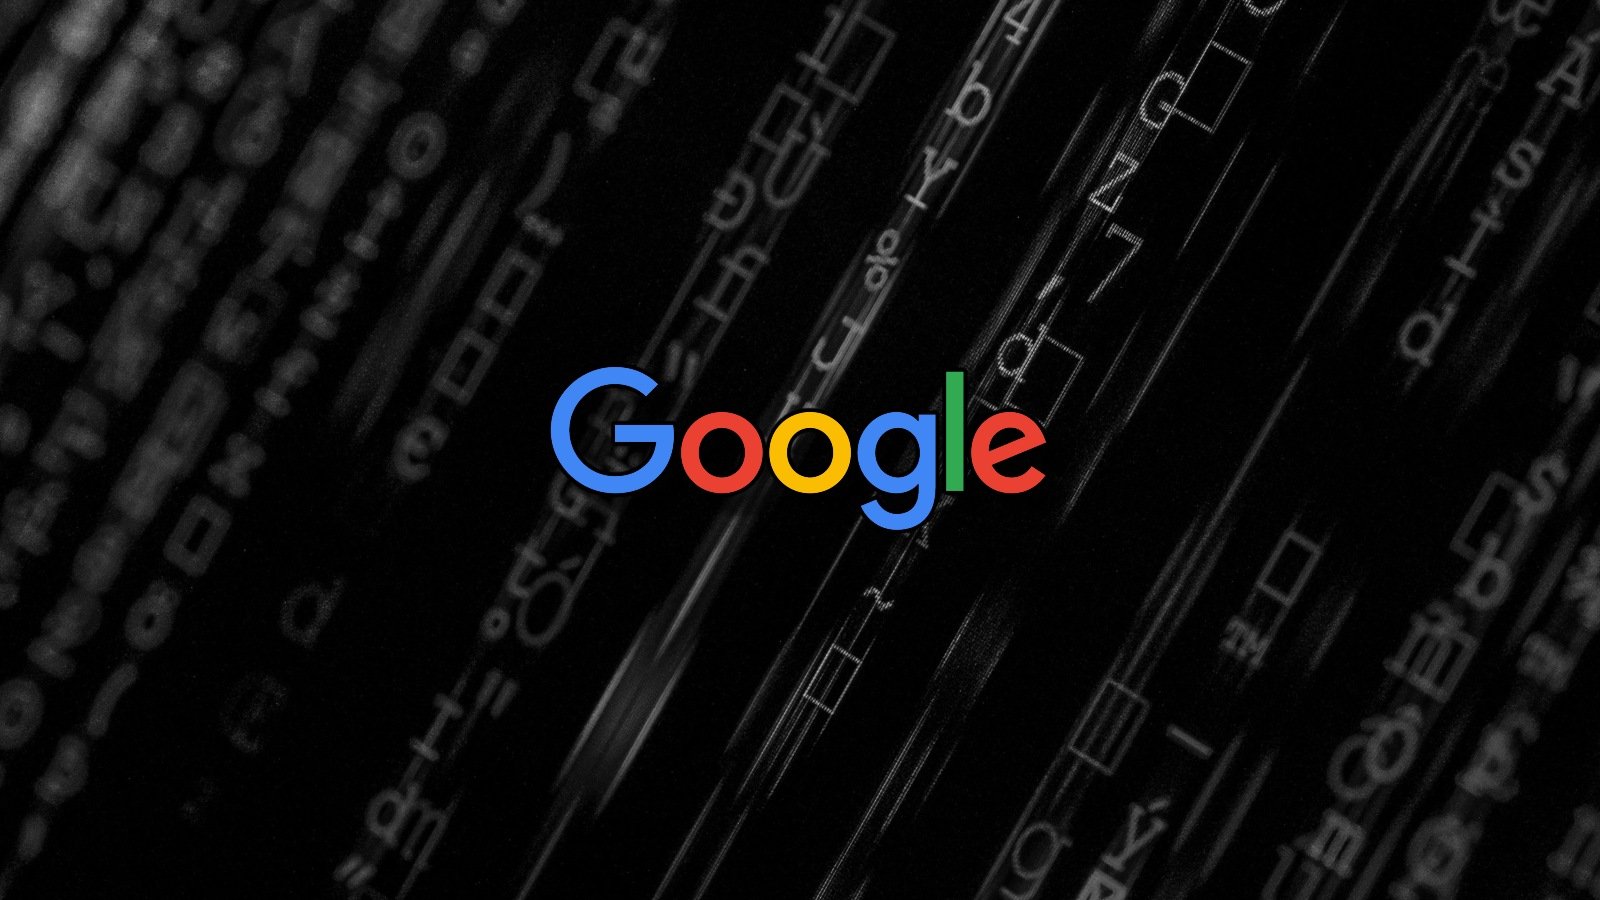 Google makes it easier to remove your info, explicit images from search